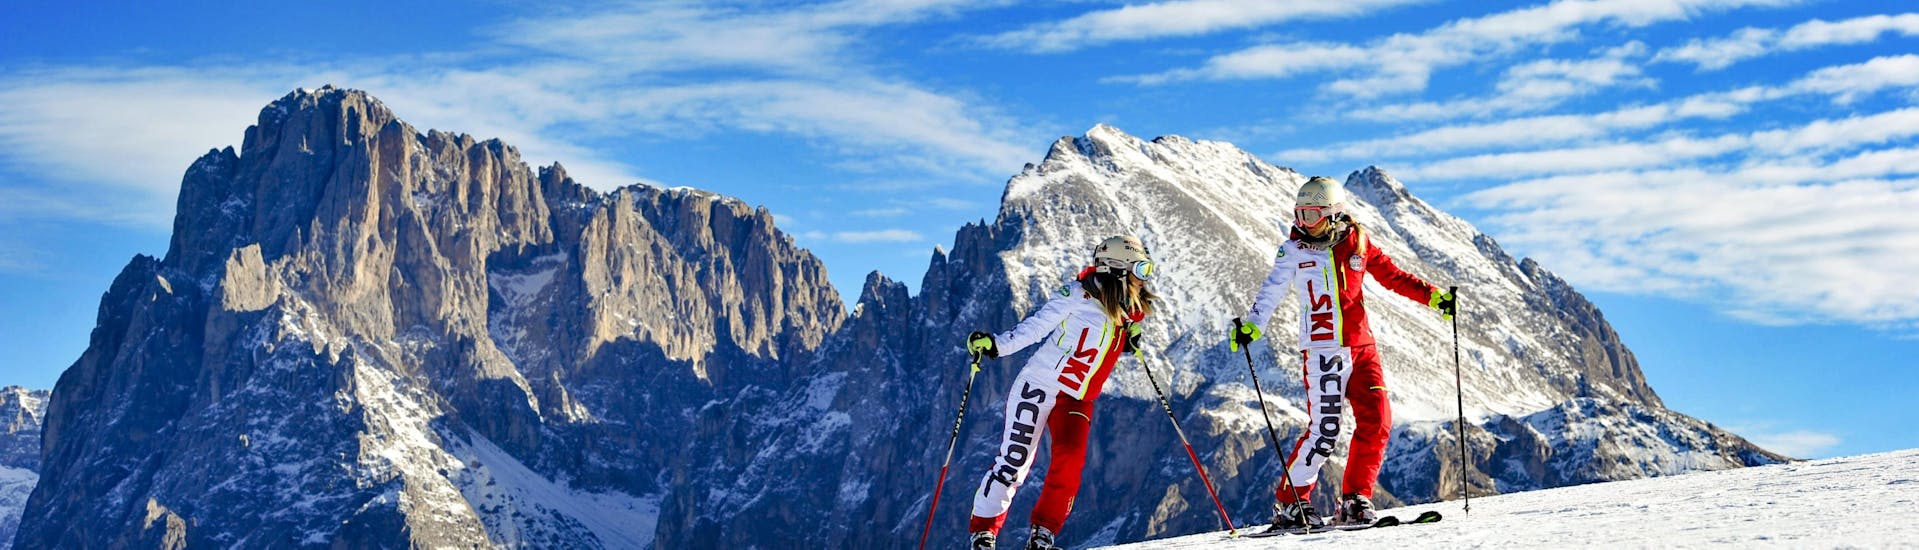 A challenge day for a customer during the skyguiding for advanced skiers with Scuola di Sci Alpe di Siusi.